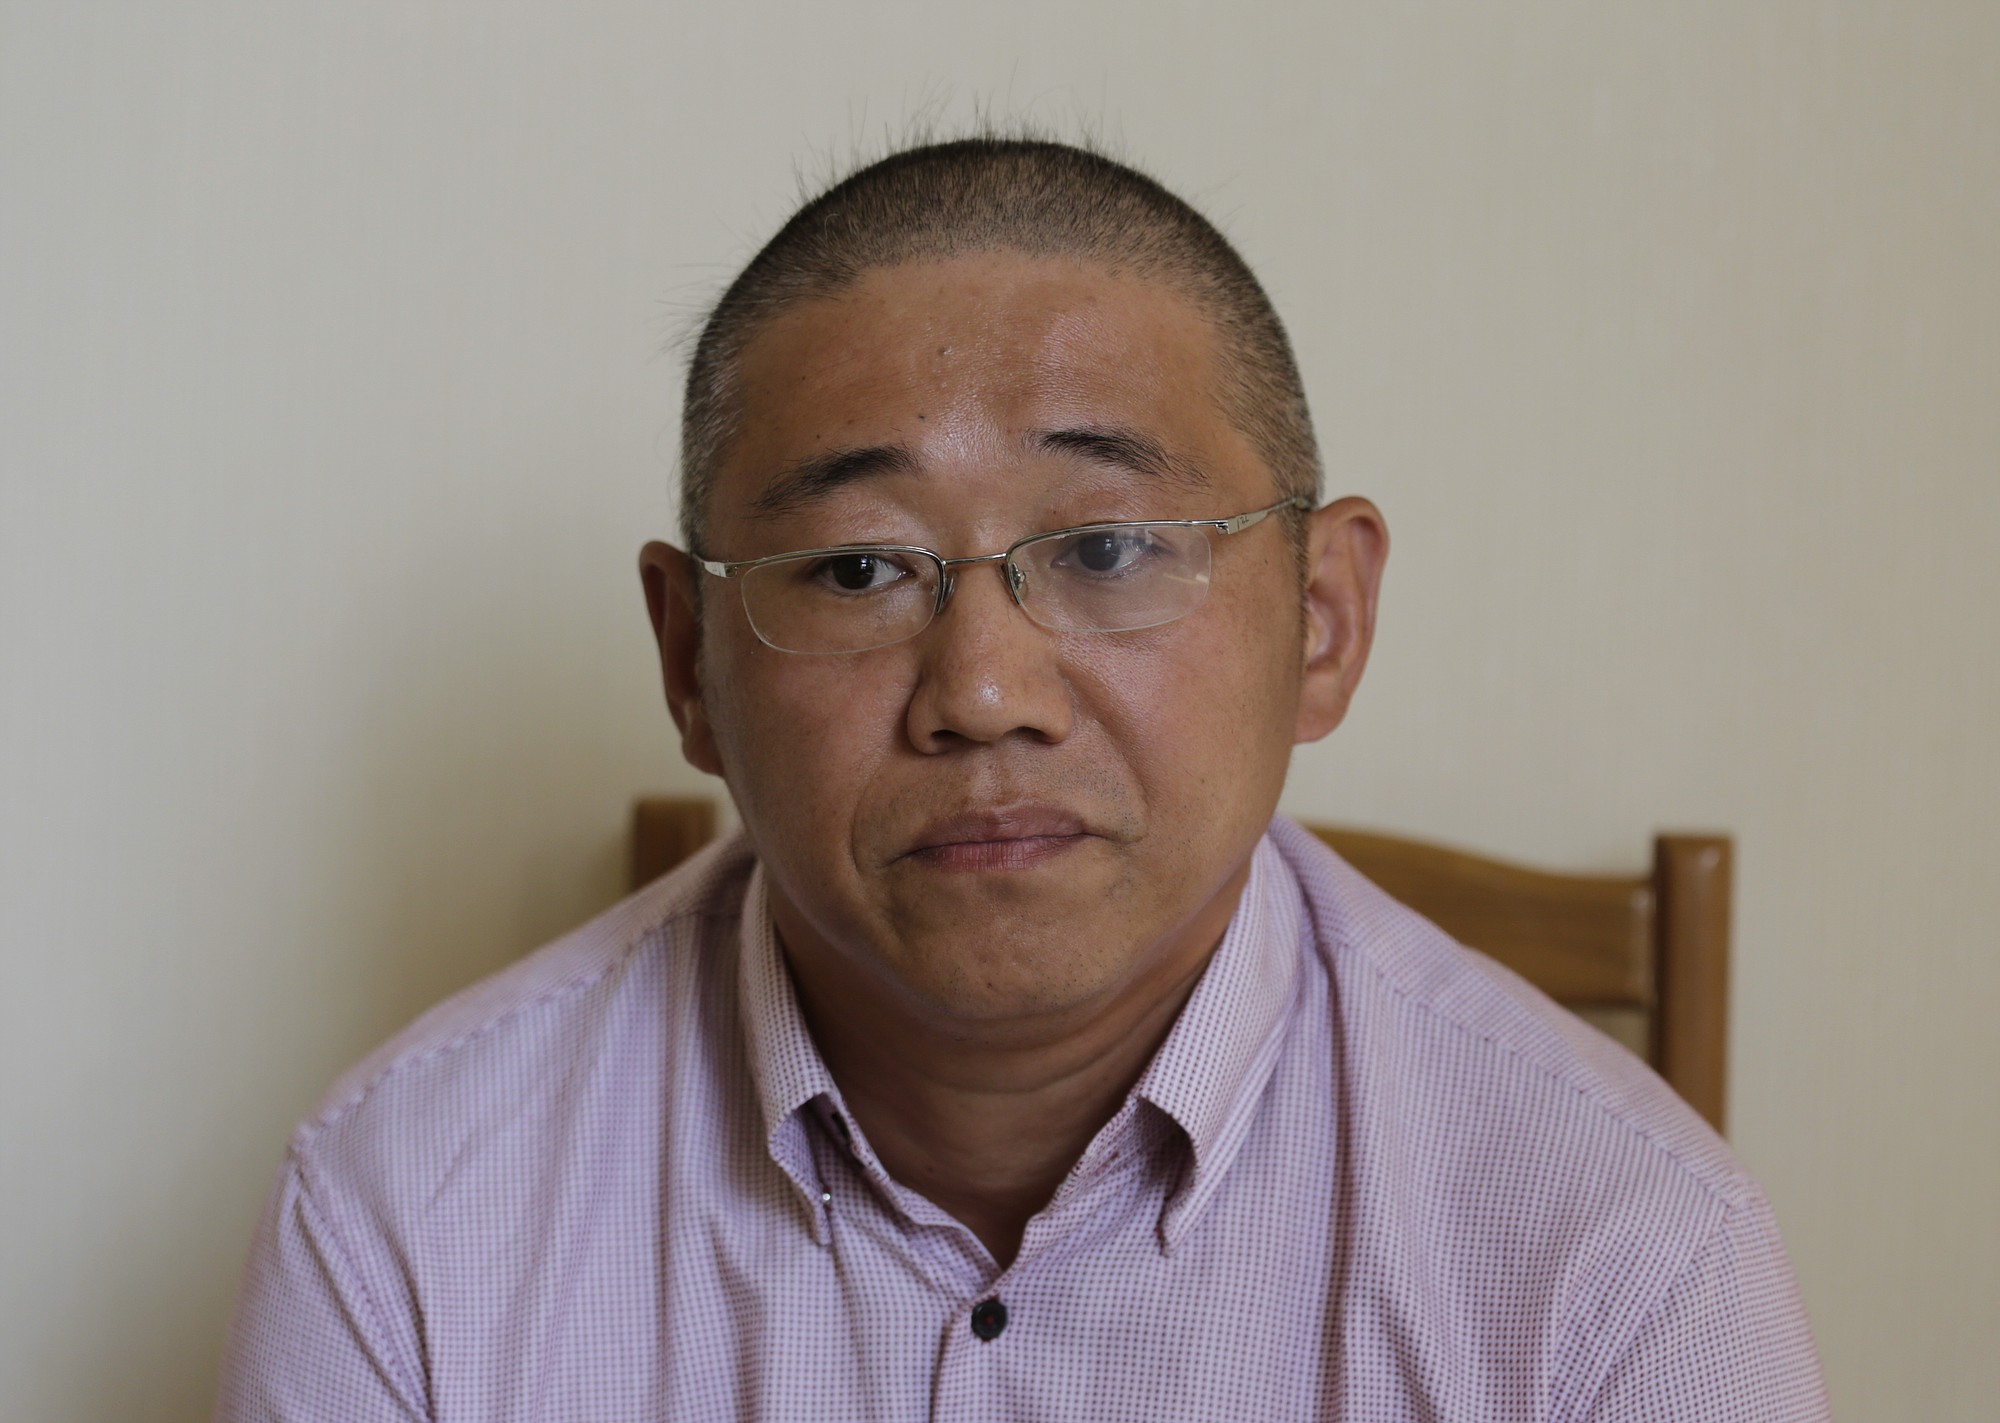 Kenneth Bae is serving a 15-year sentence.